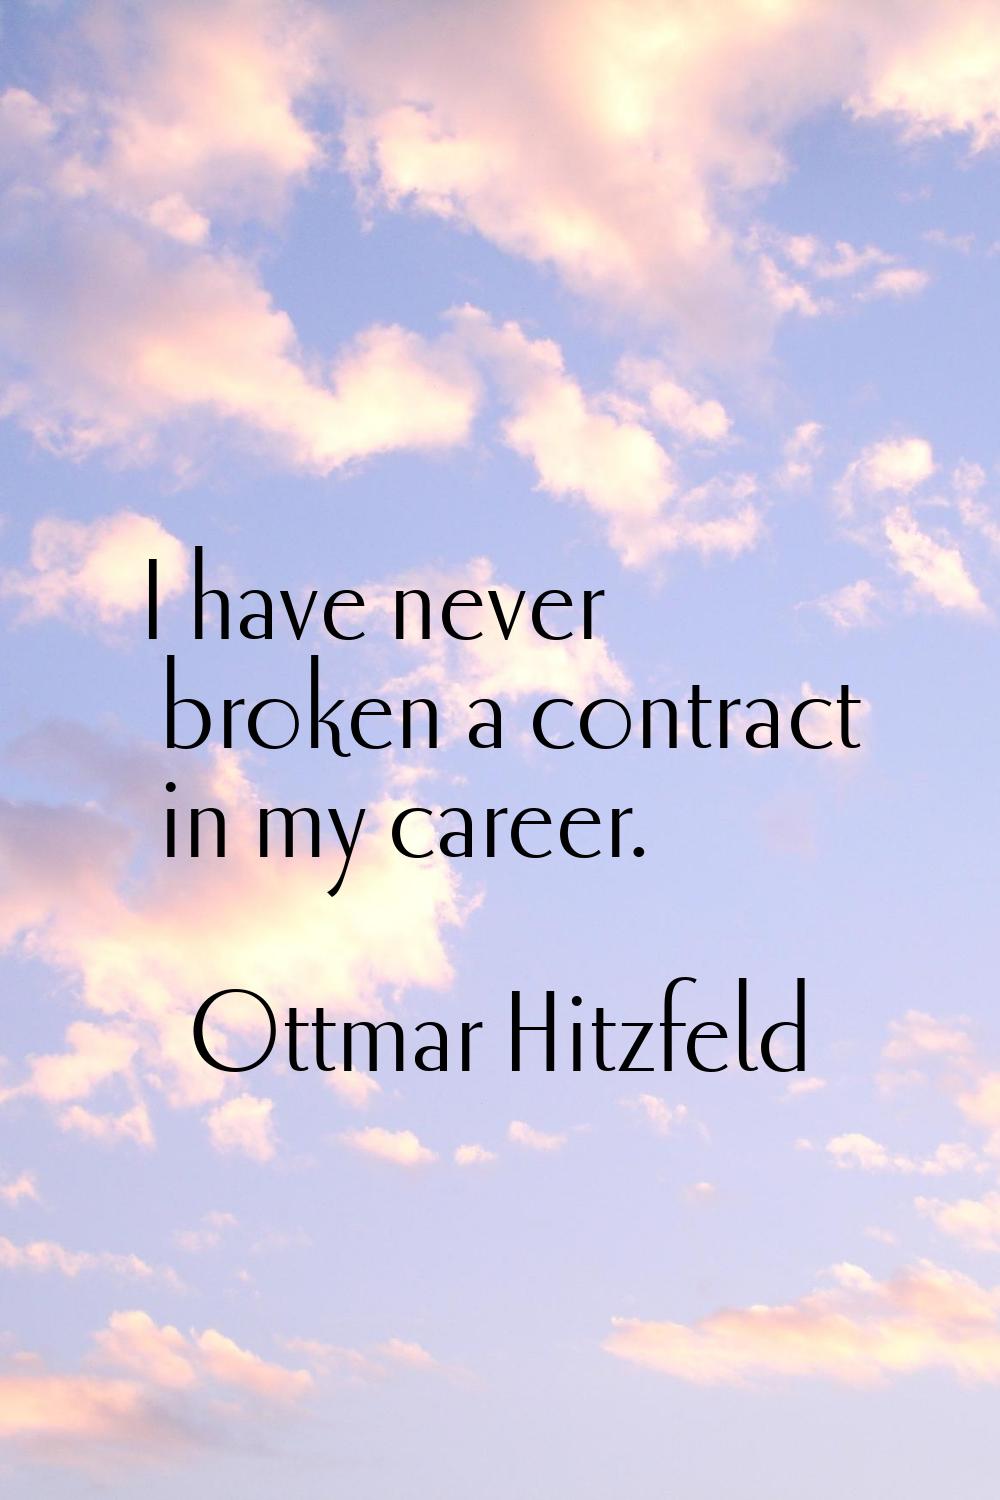 I have never broken a contract in my career.